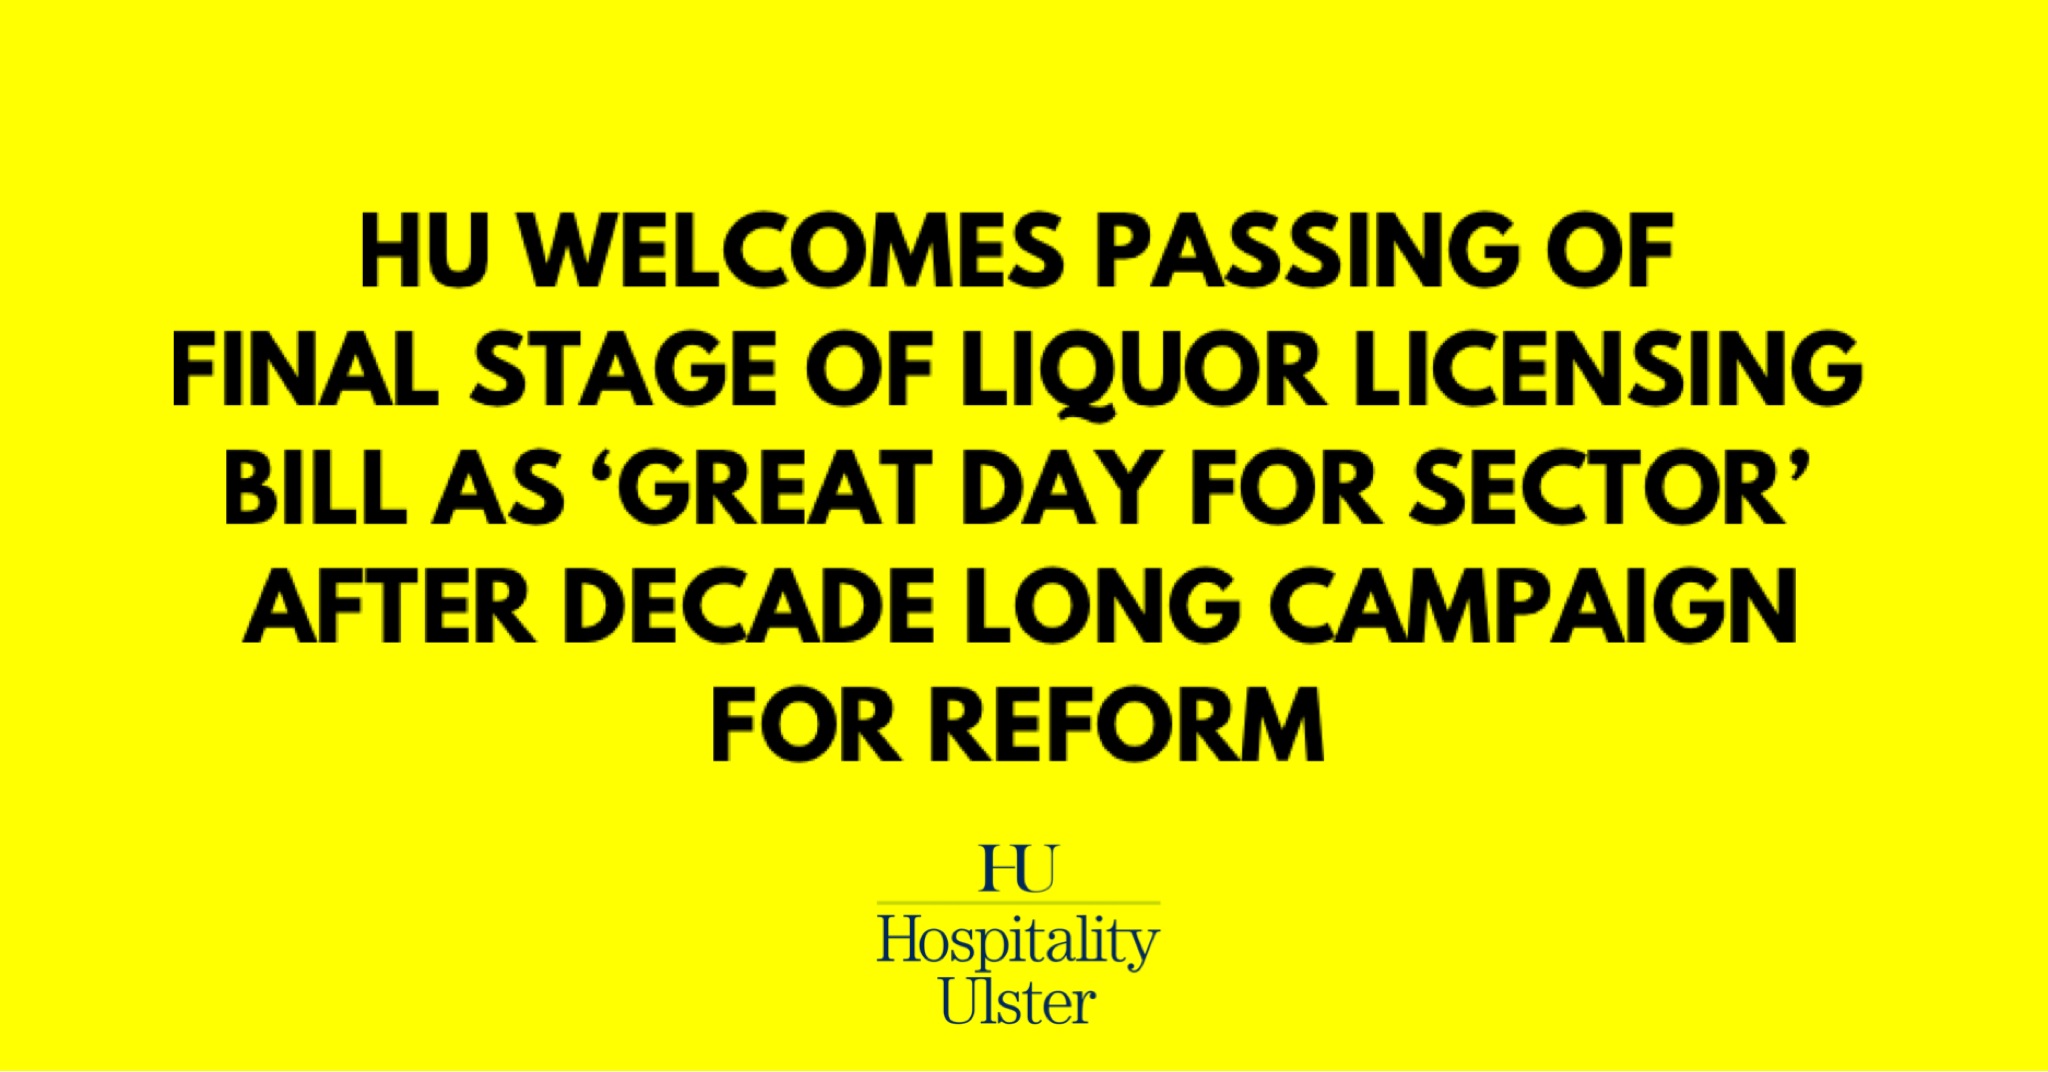 HU WELCOMES PASSING OF FINAL STAGE OF LIQUOR LICENSING BILL AFTER DECADE LONG CAMPAIGN FOR REFORM